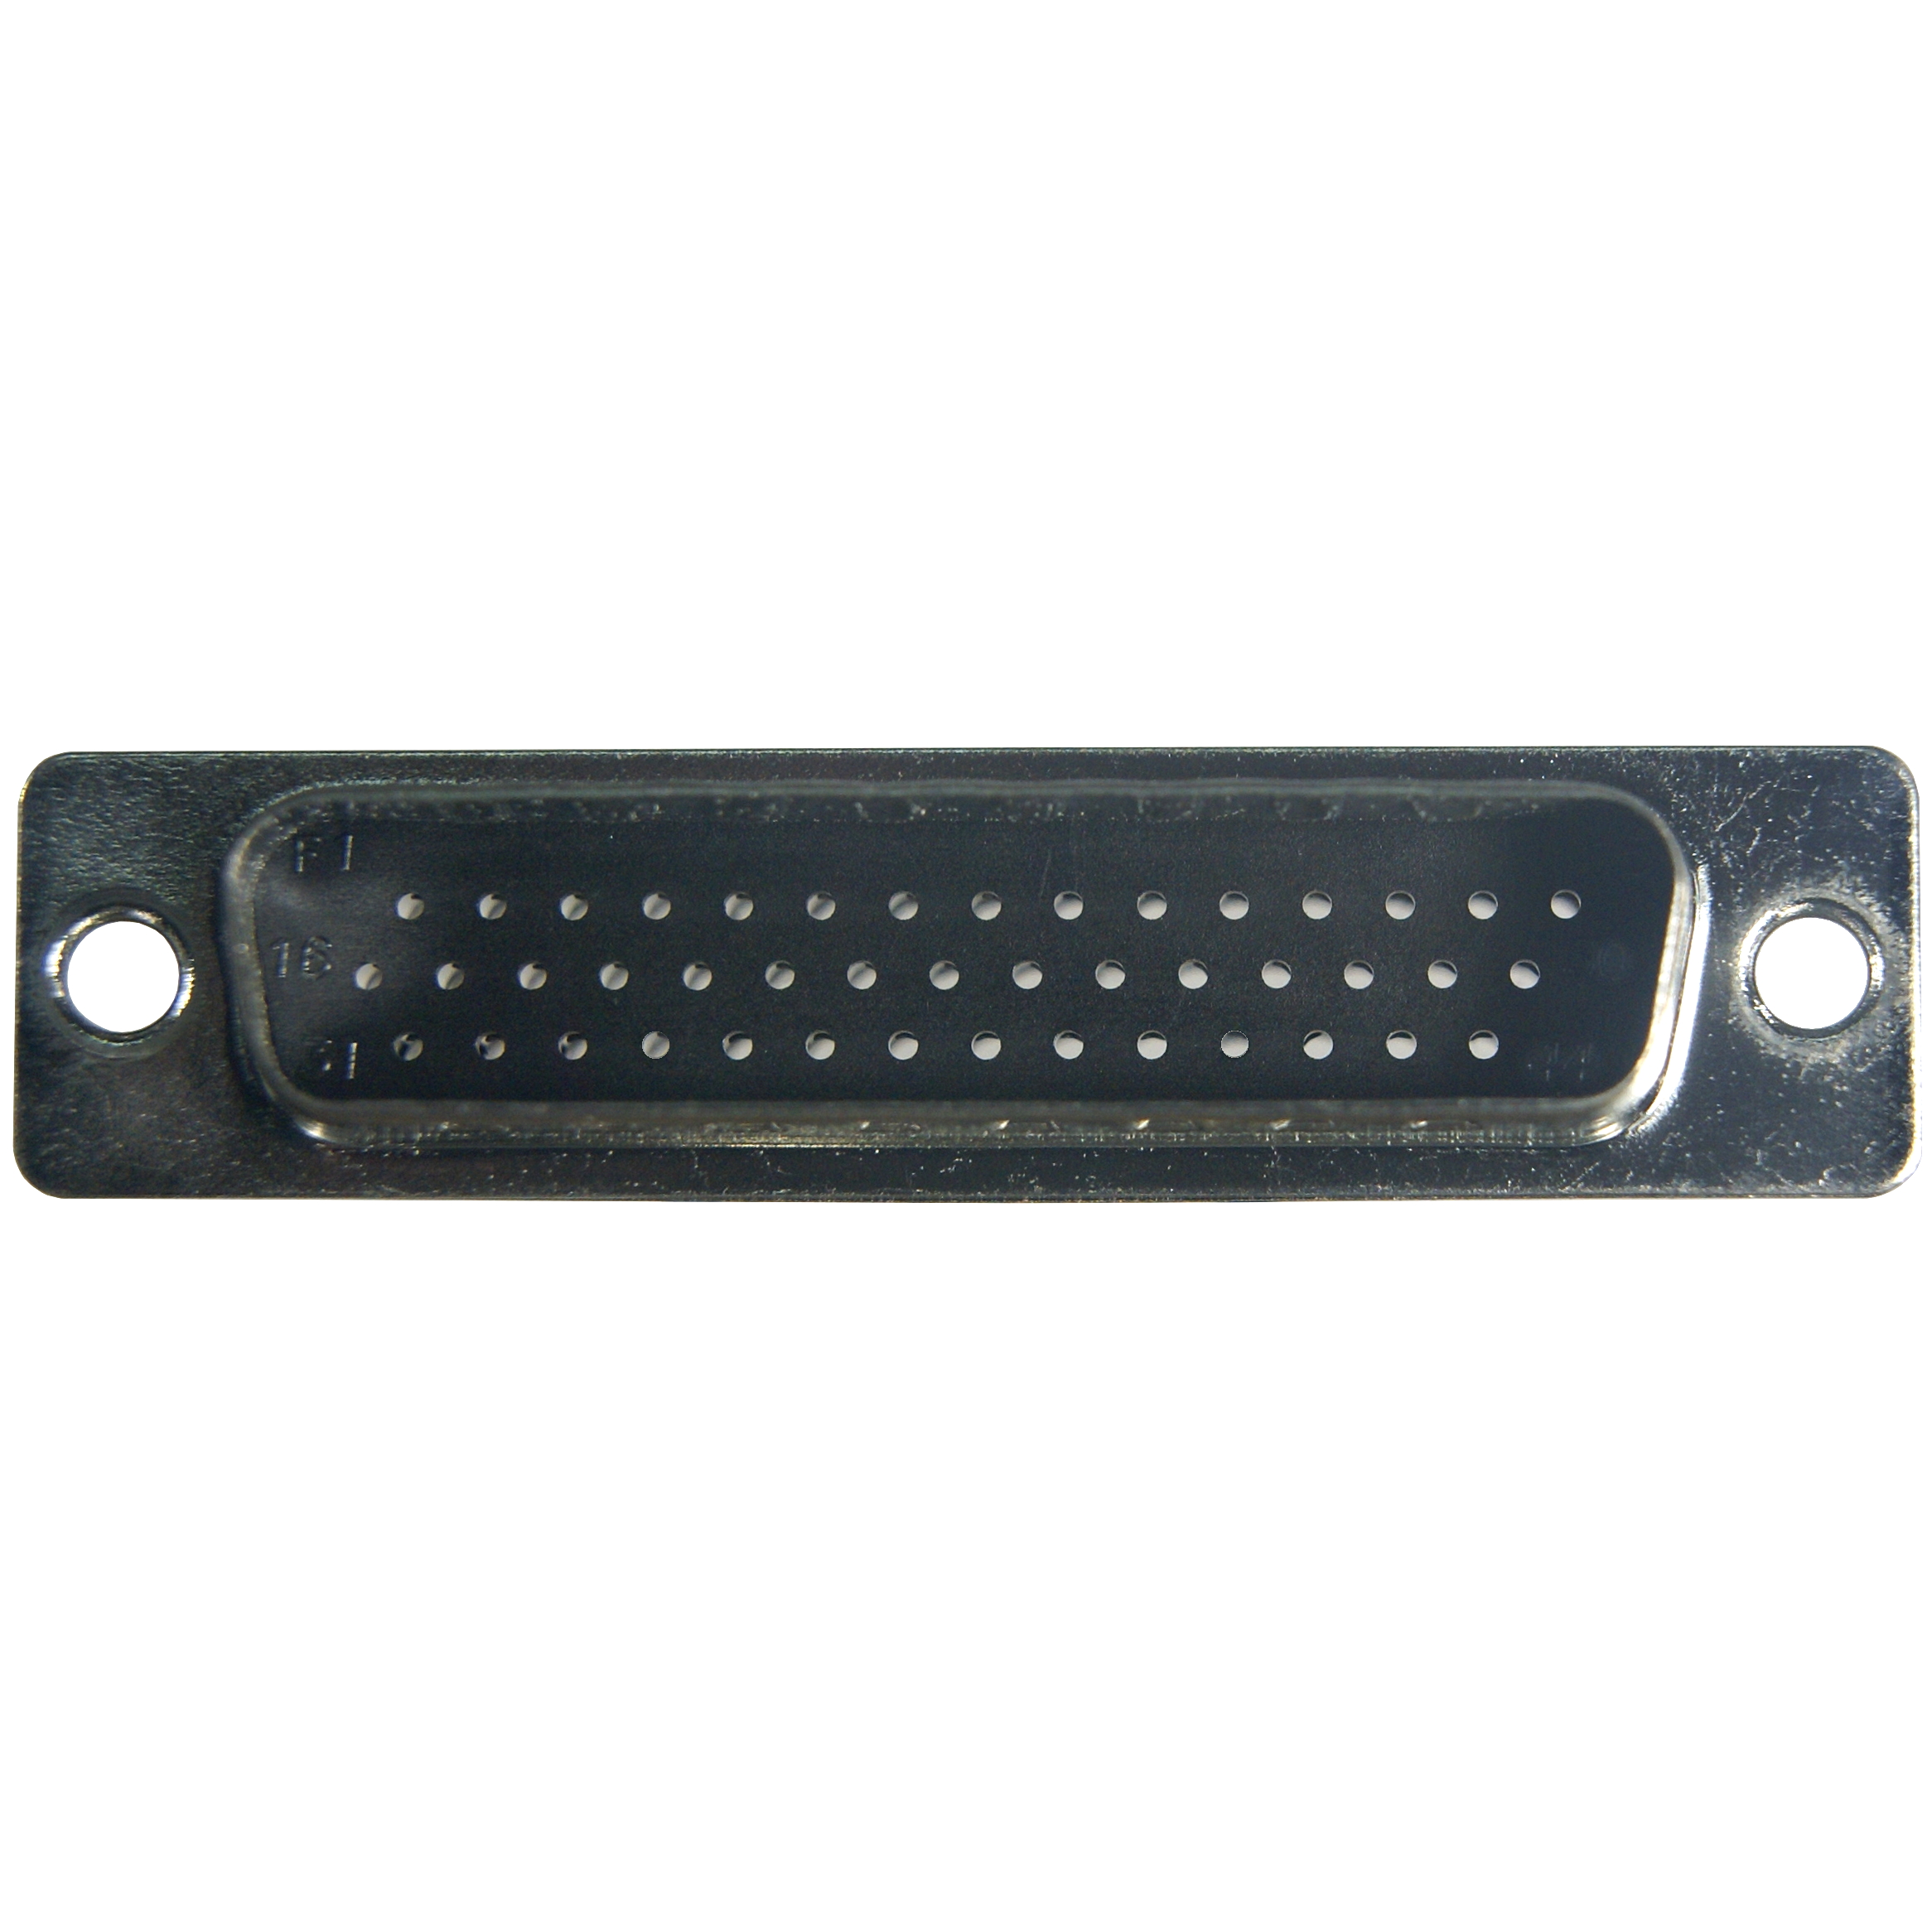 Dsub Connector, High Density, 44 Pin Contacts, Male